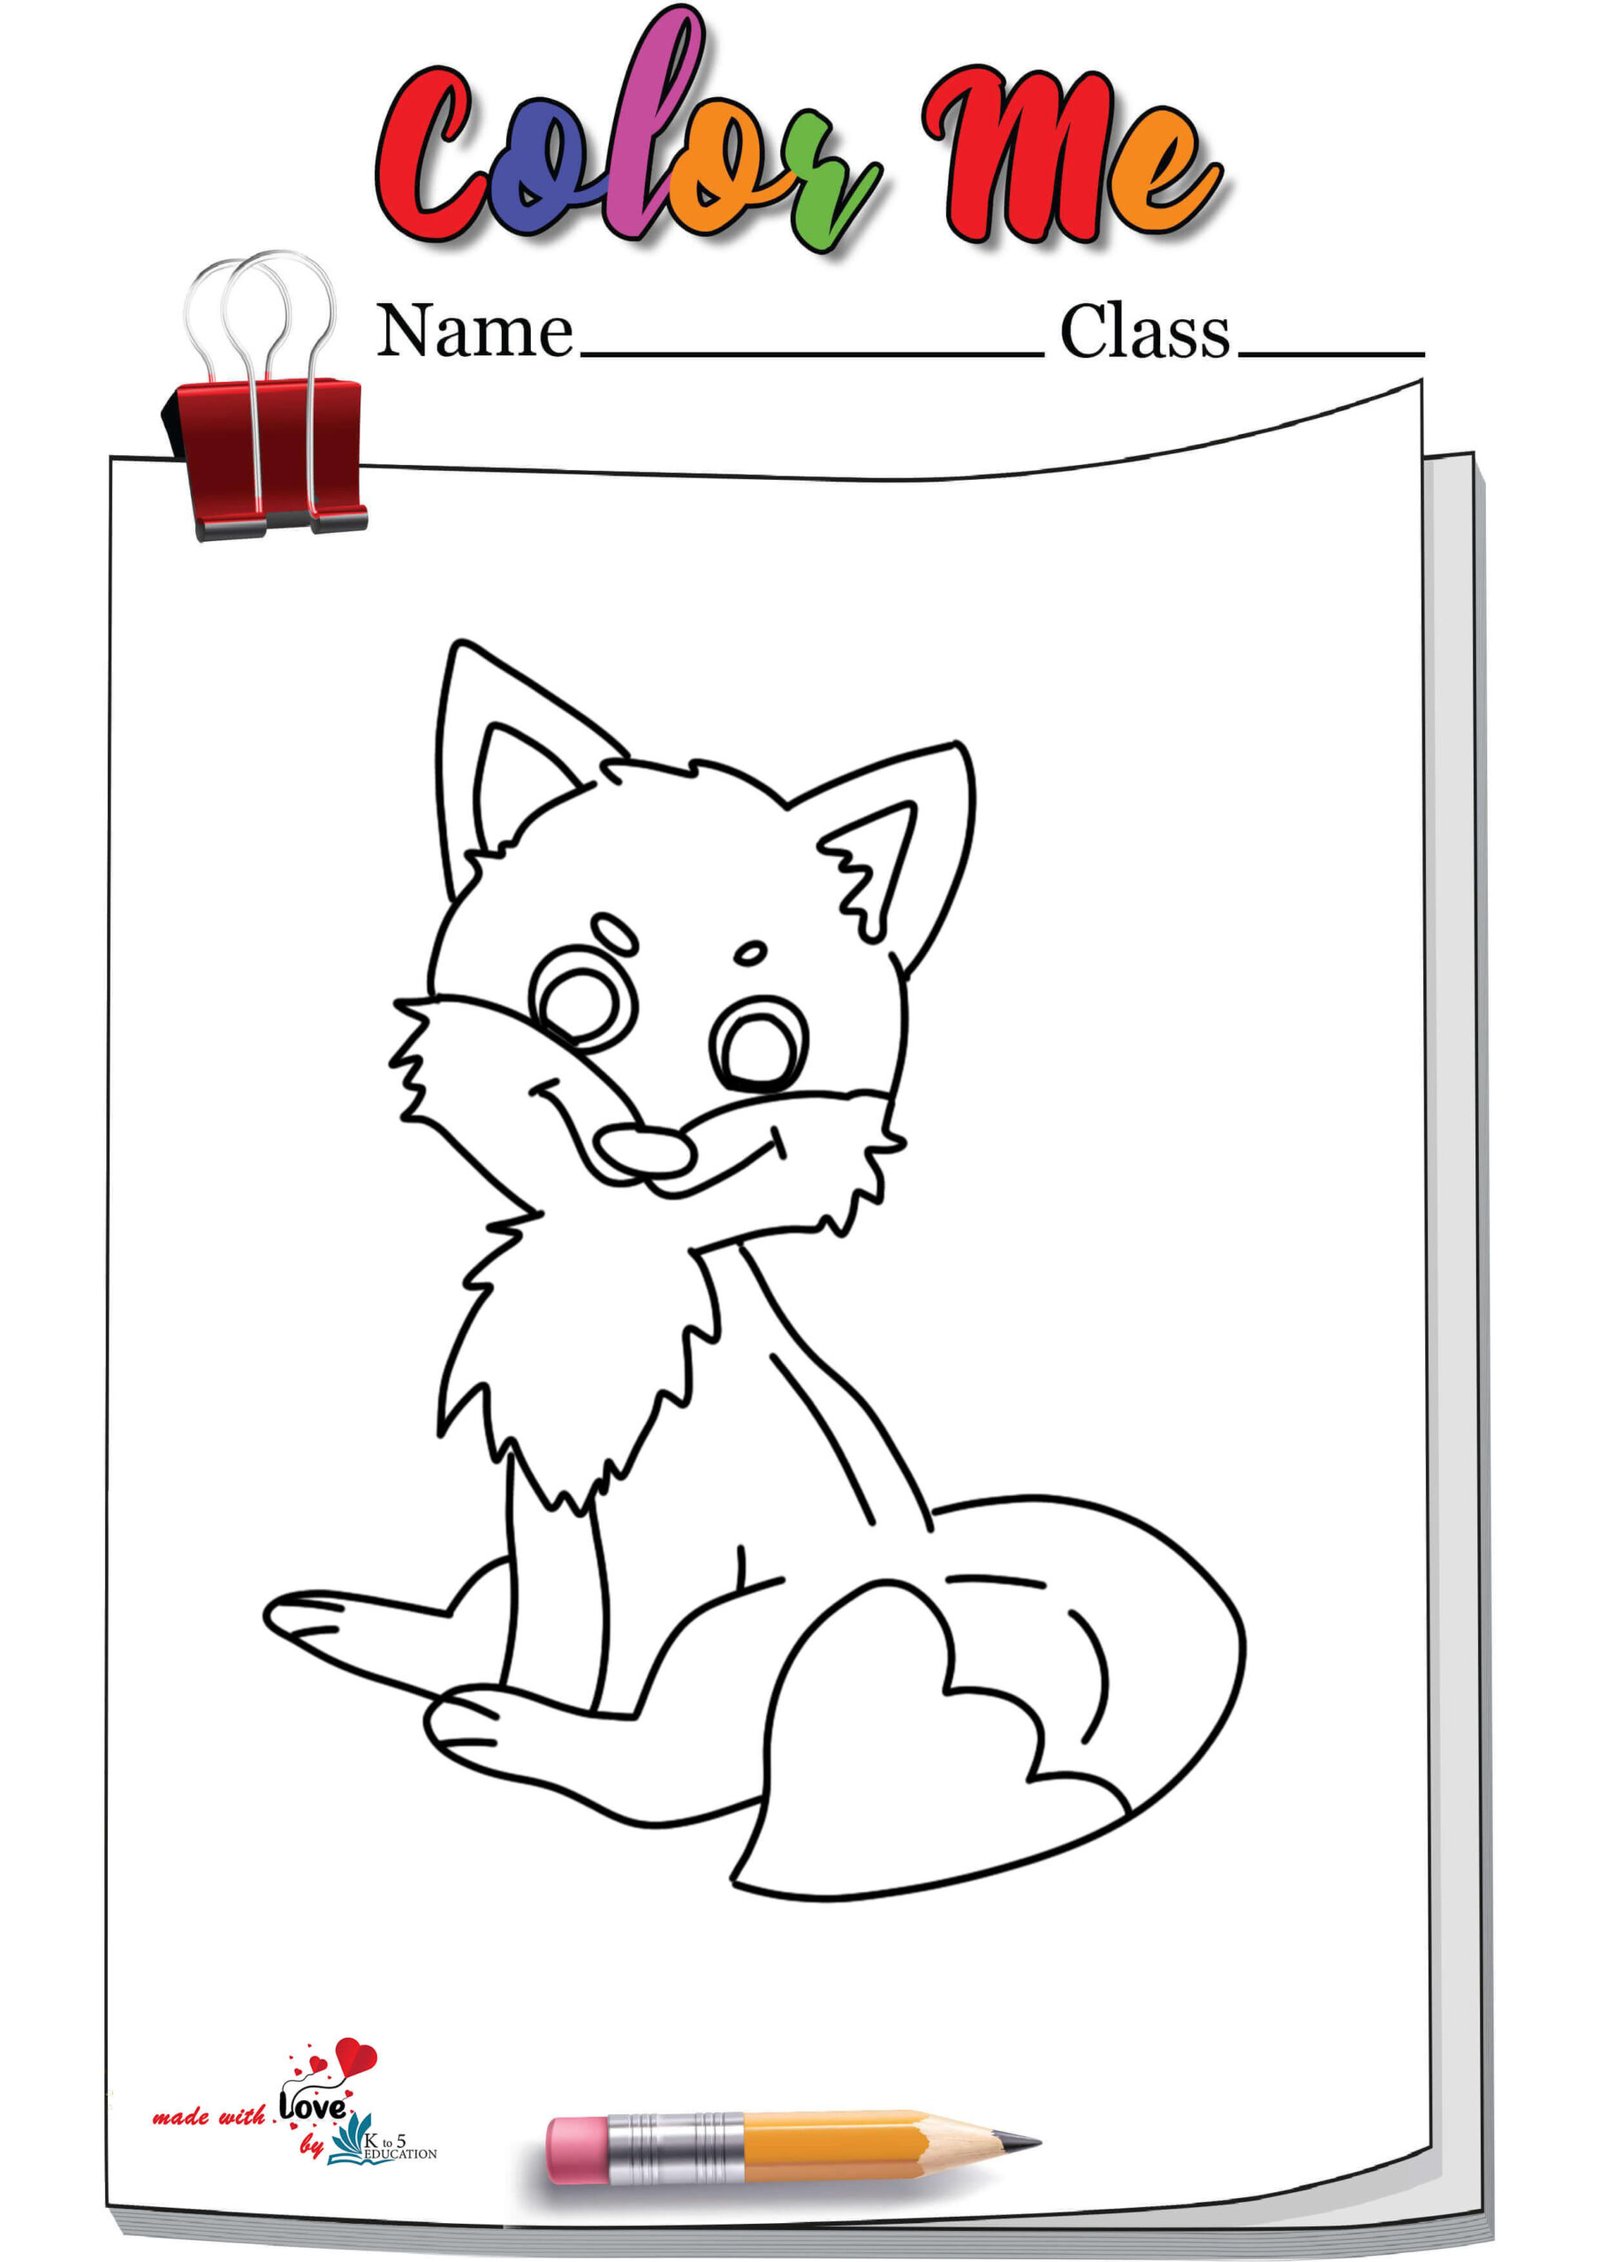 Wise Fox Coloring Page